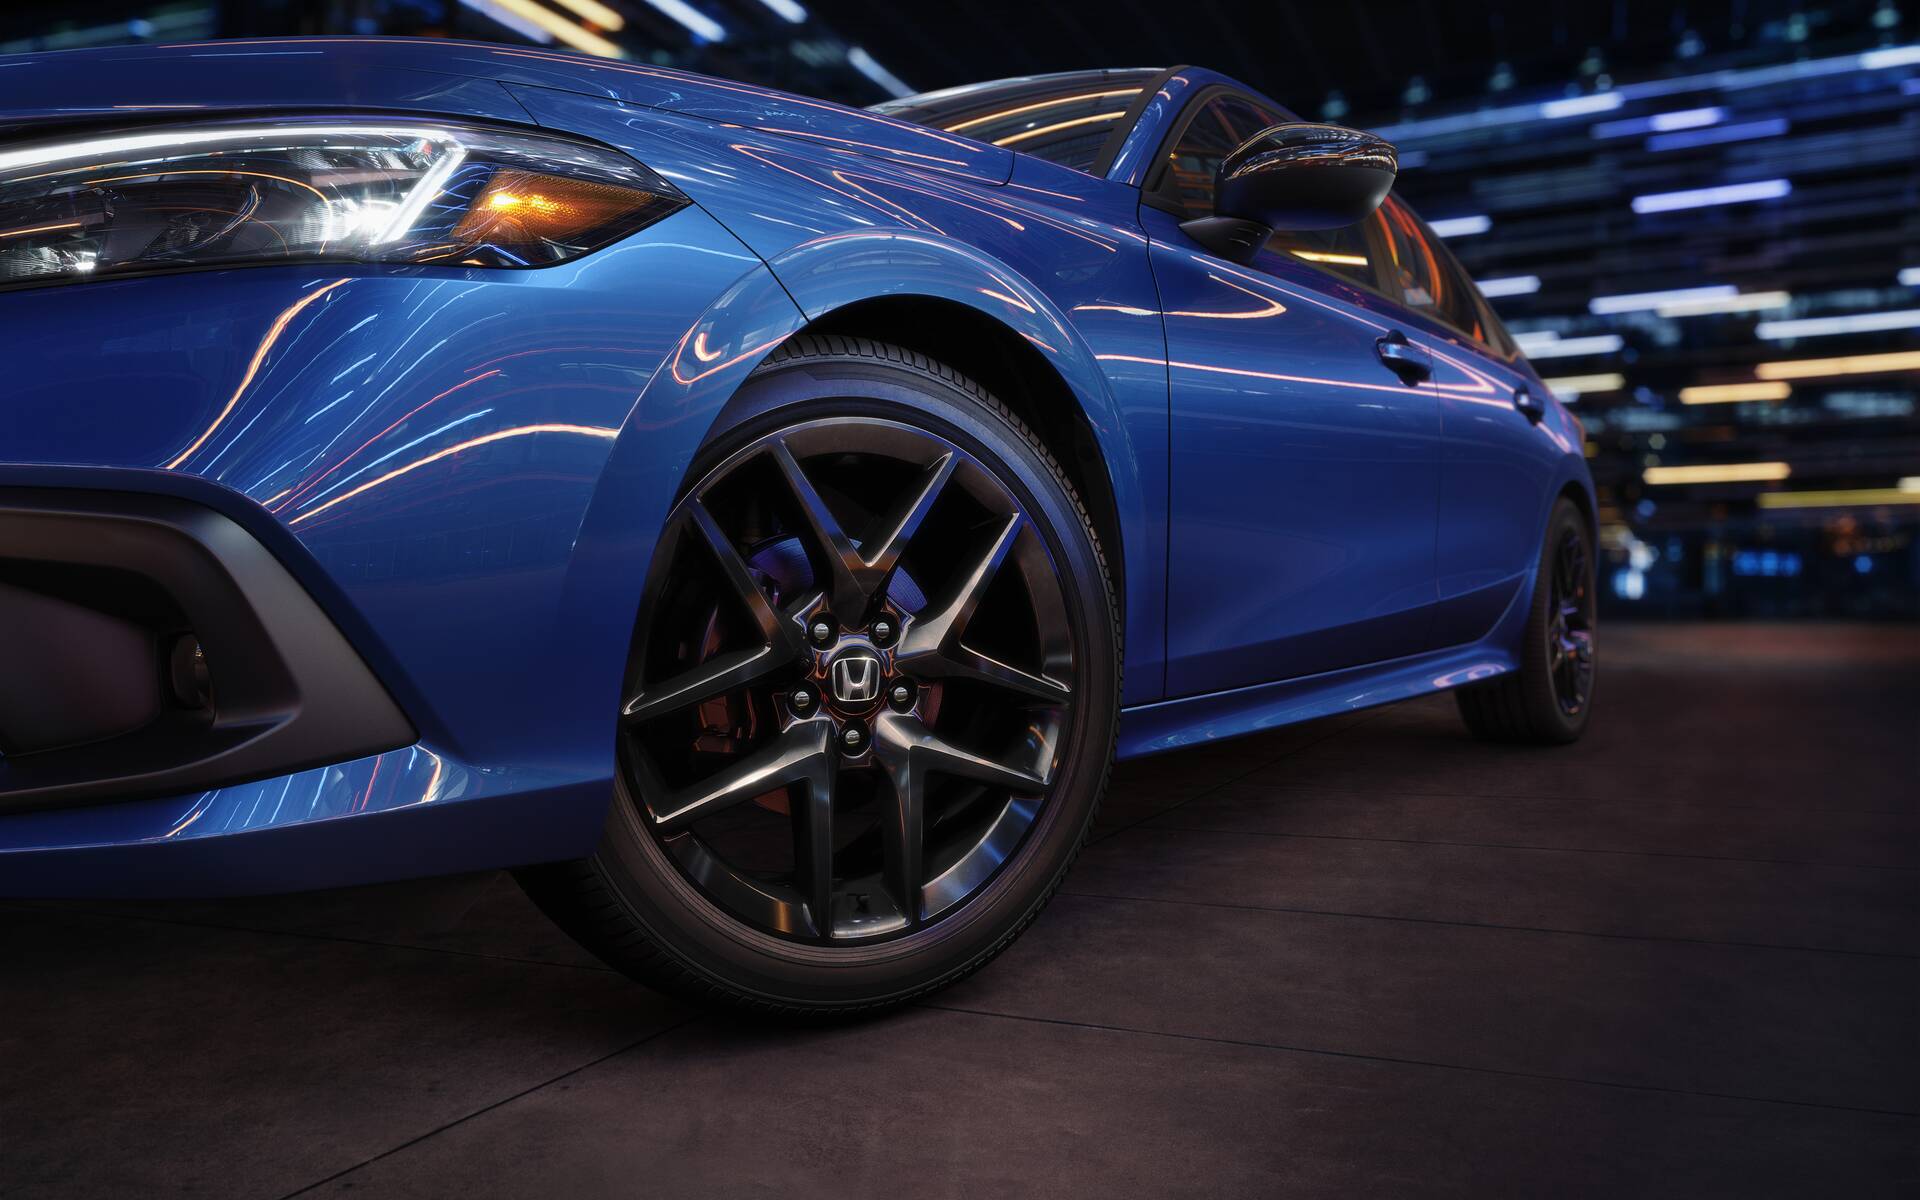 2022 Honda Civic: How to Reinvent the Wheel - The Car Guide